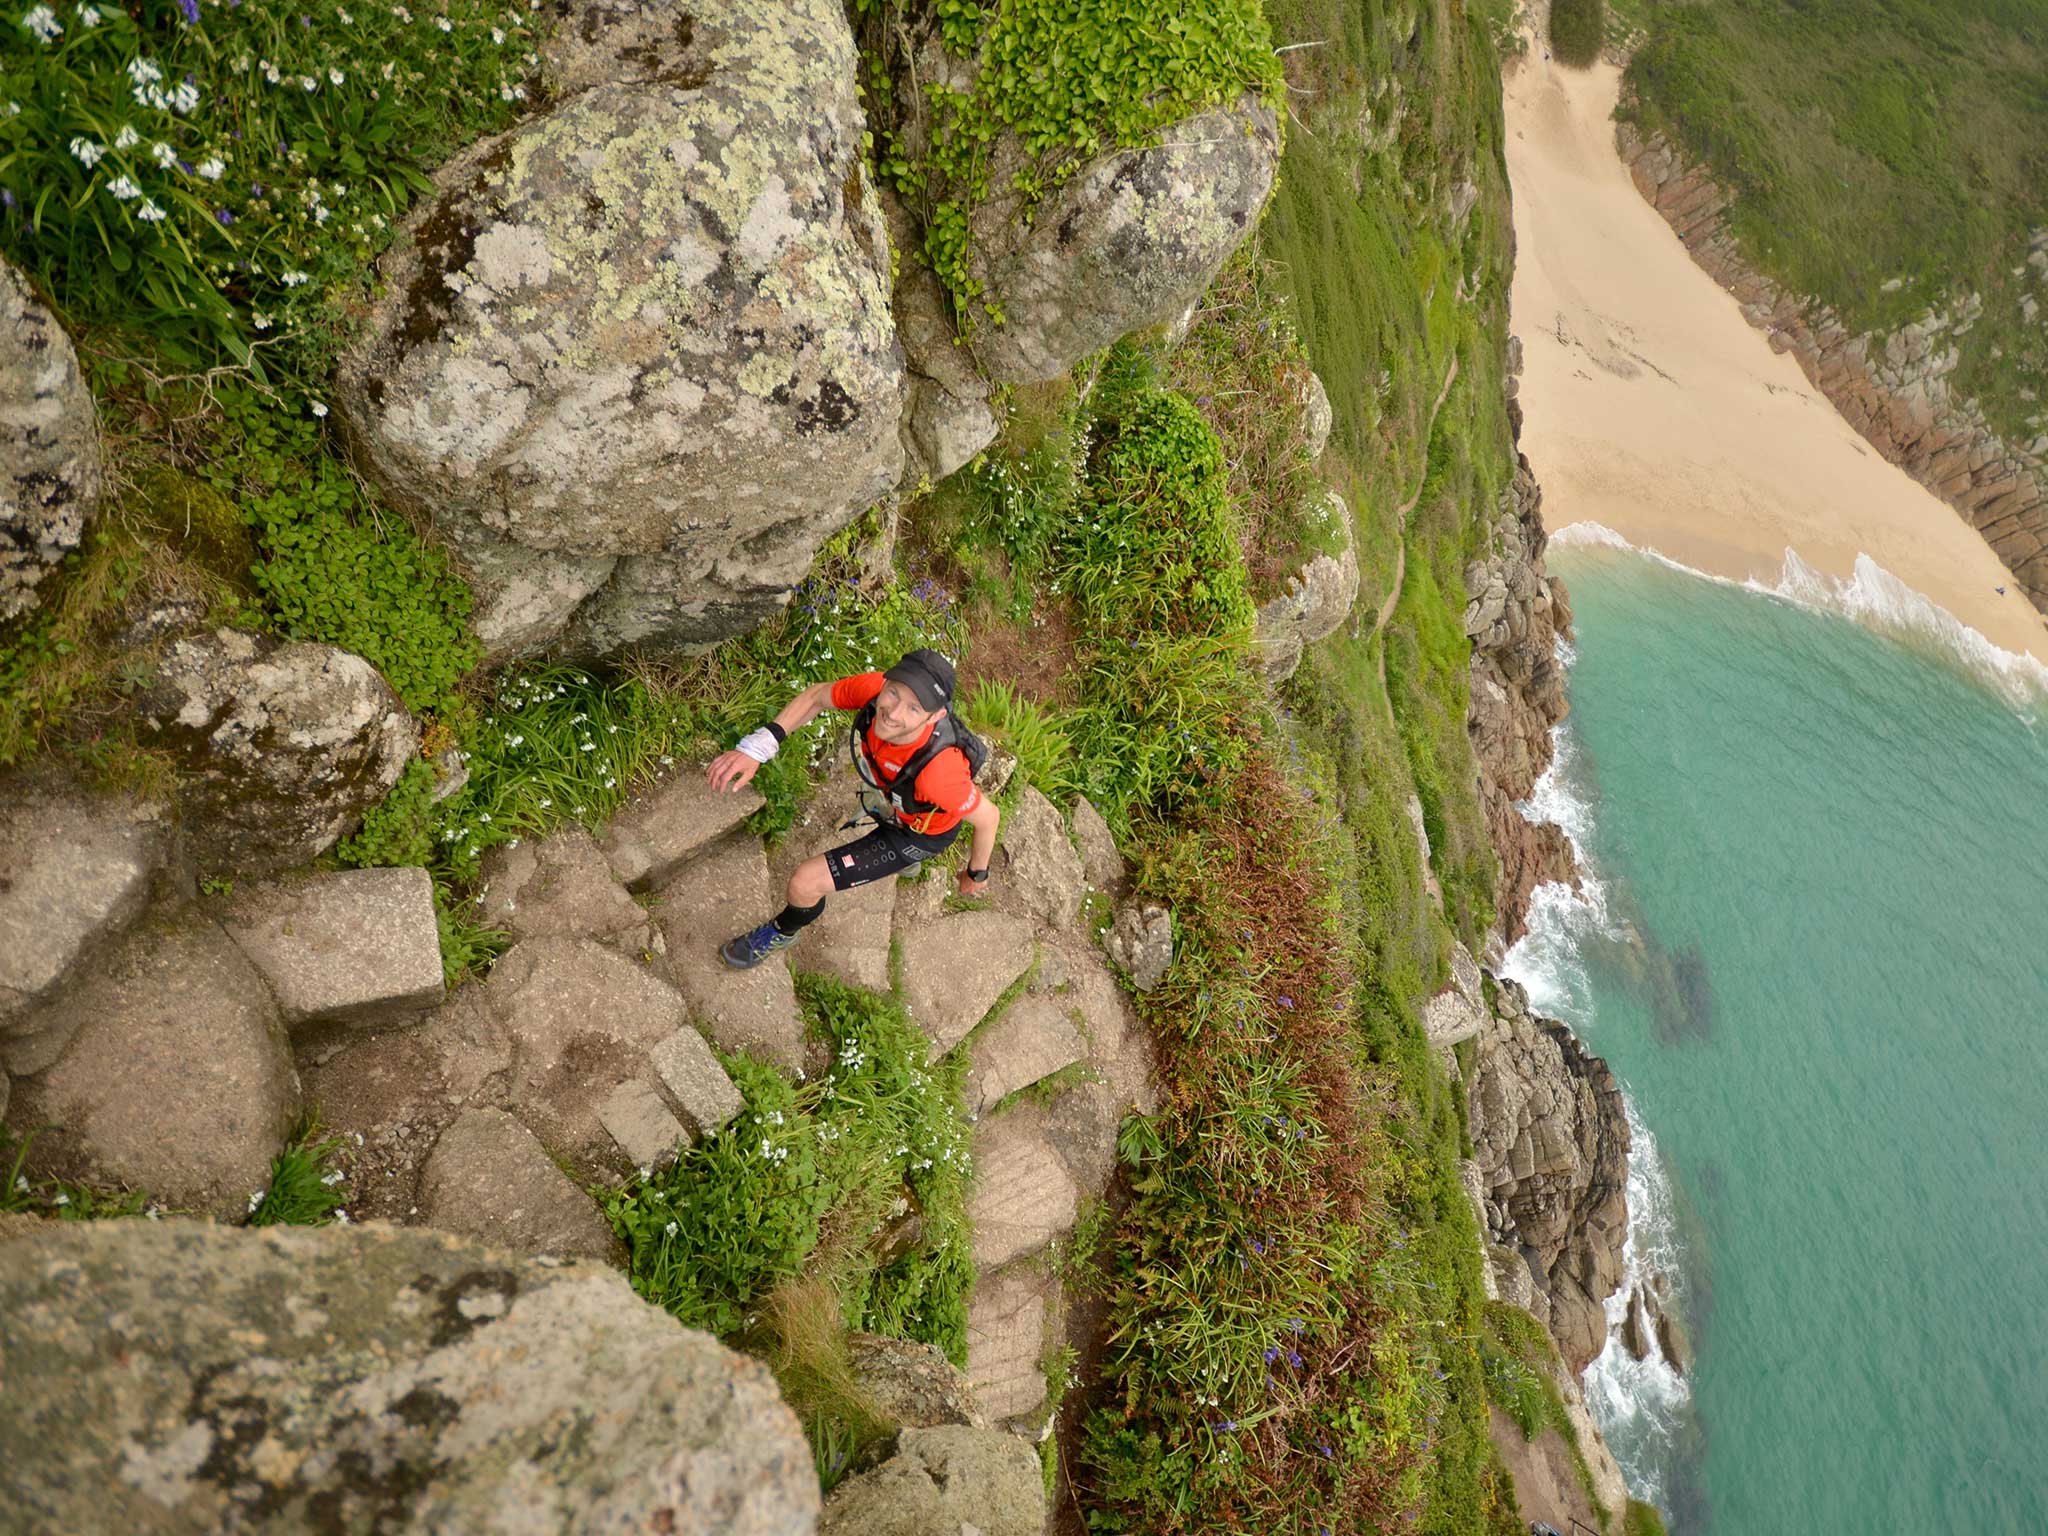 &#13;
Climbing up cliffs near the Minack Theatre, Cornwall, on day seven&#13;